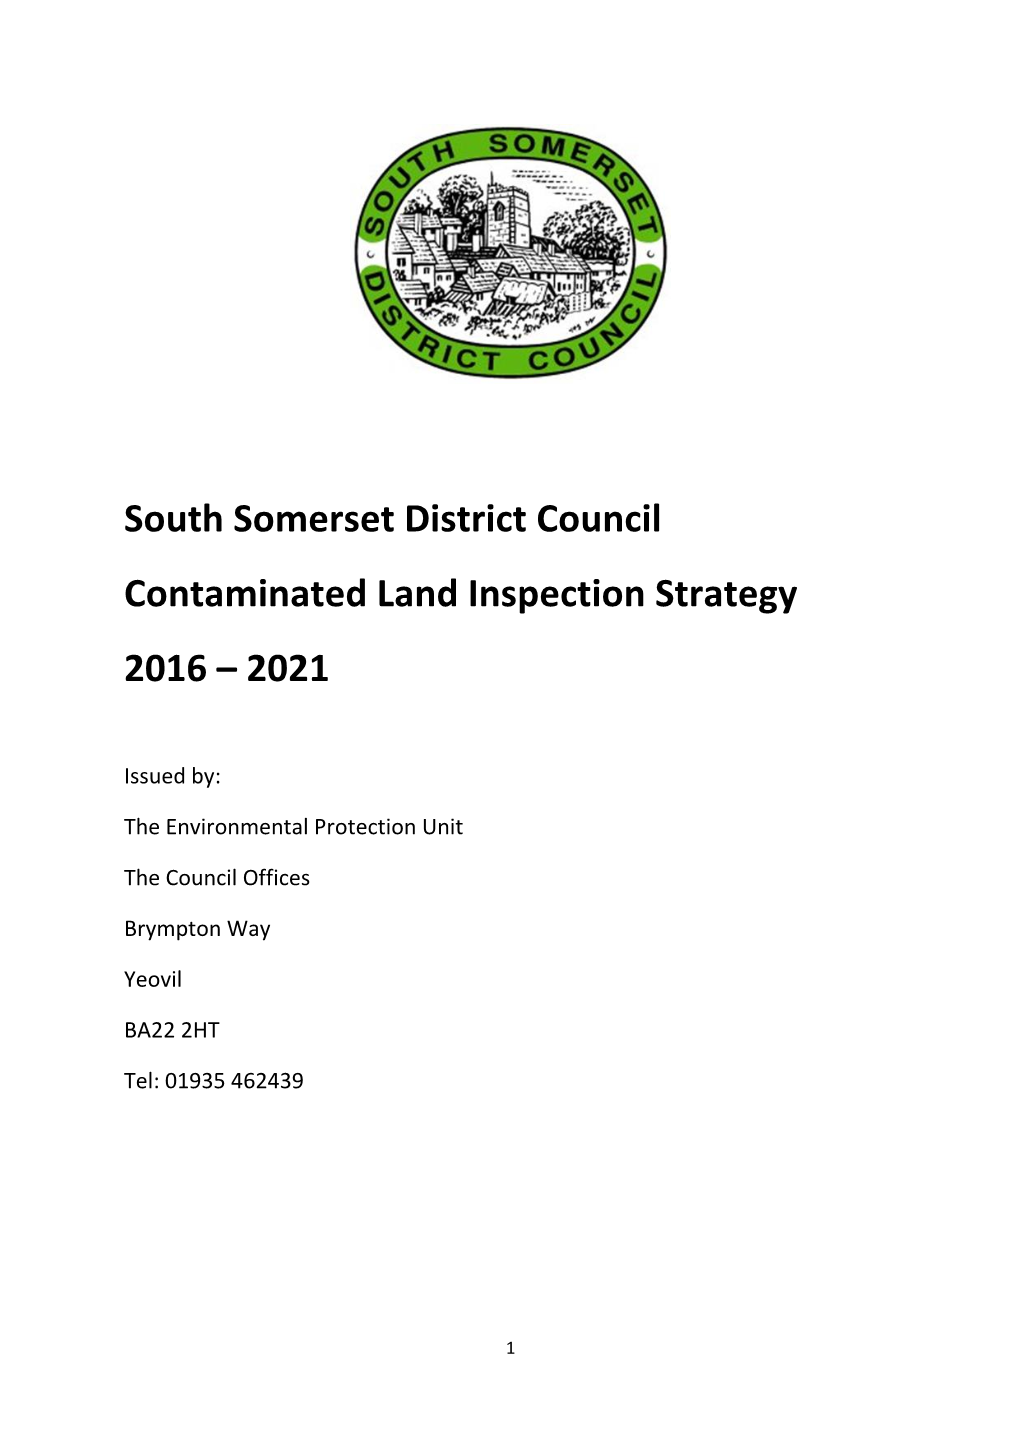 Contaminated Land Inspection Strategy 2016 – 2021